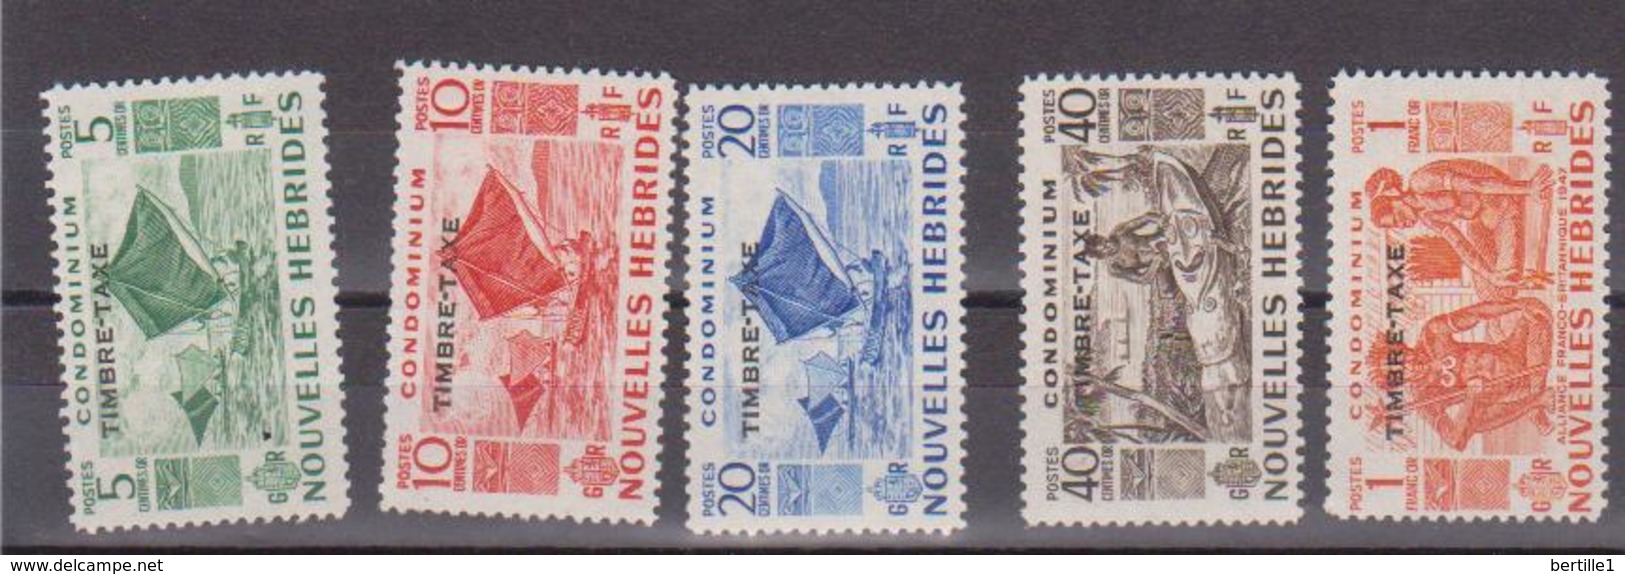 NOUVELLES HEBRIDES             N° YVERT  :  TAXE 36/40         NEUF SANS CHARNIERES  ( Nsch 02/25 ) - Postage Due